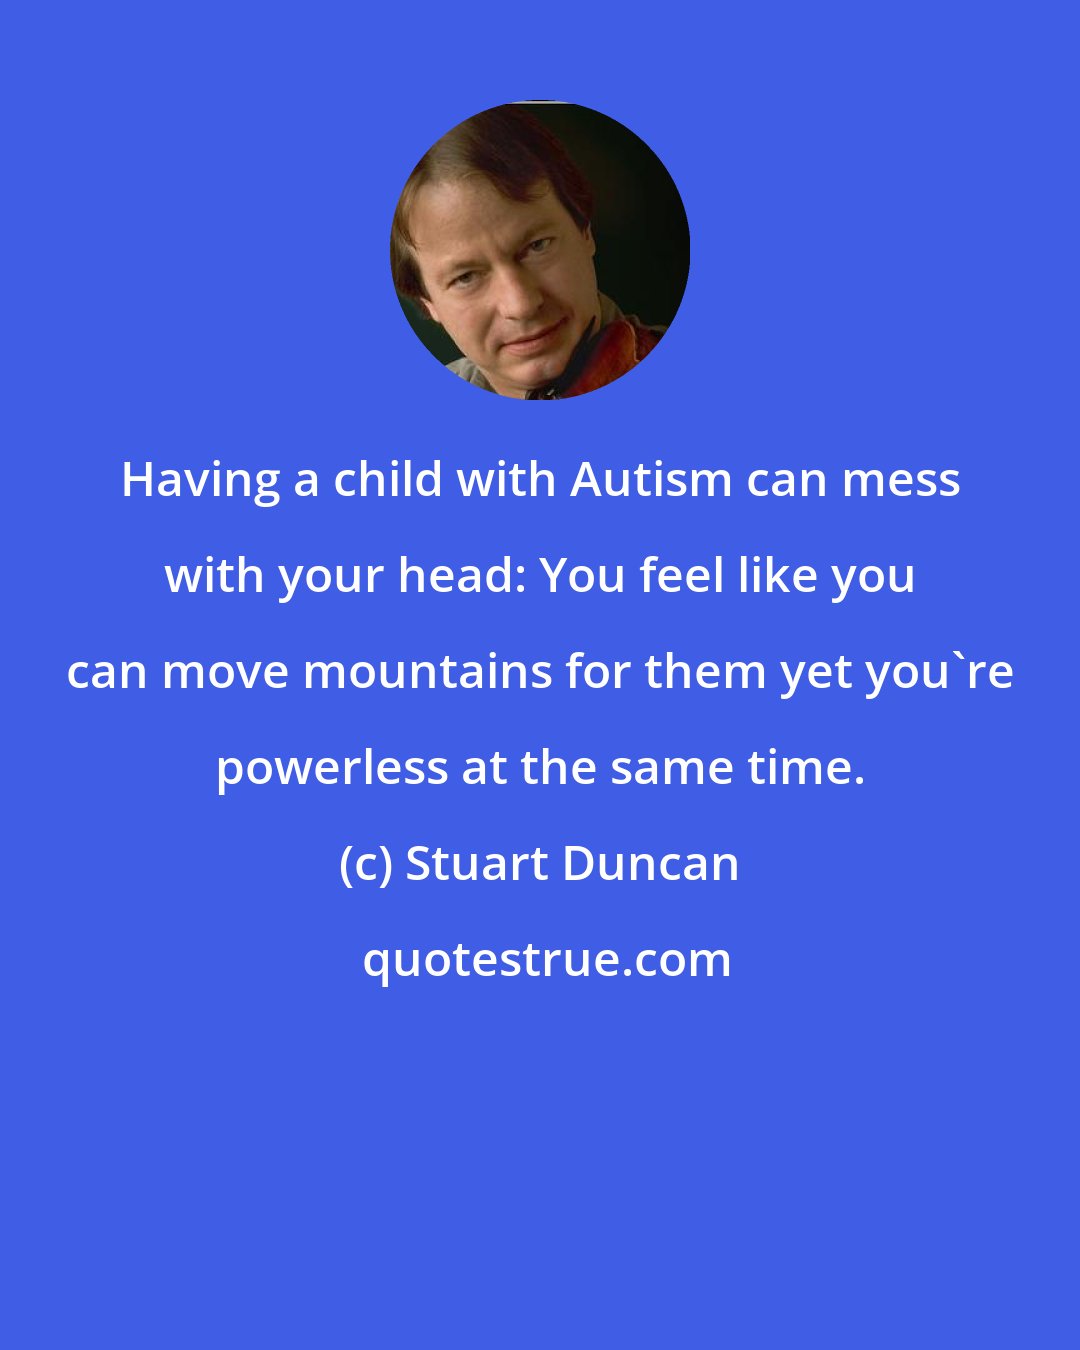 Stuart Duncan: Having a child with Autism can mess with your head: You feel like you can move mountains for them yet you're powerless at the same time.